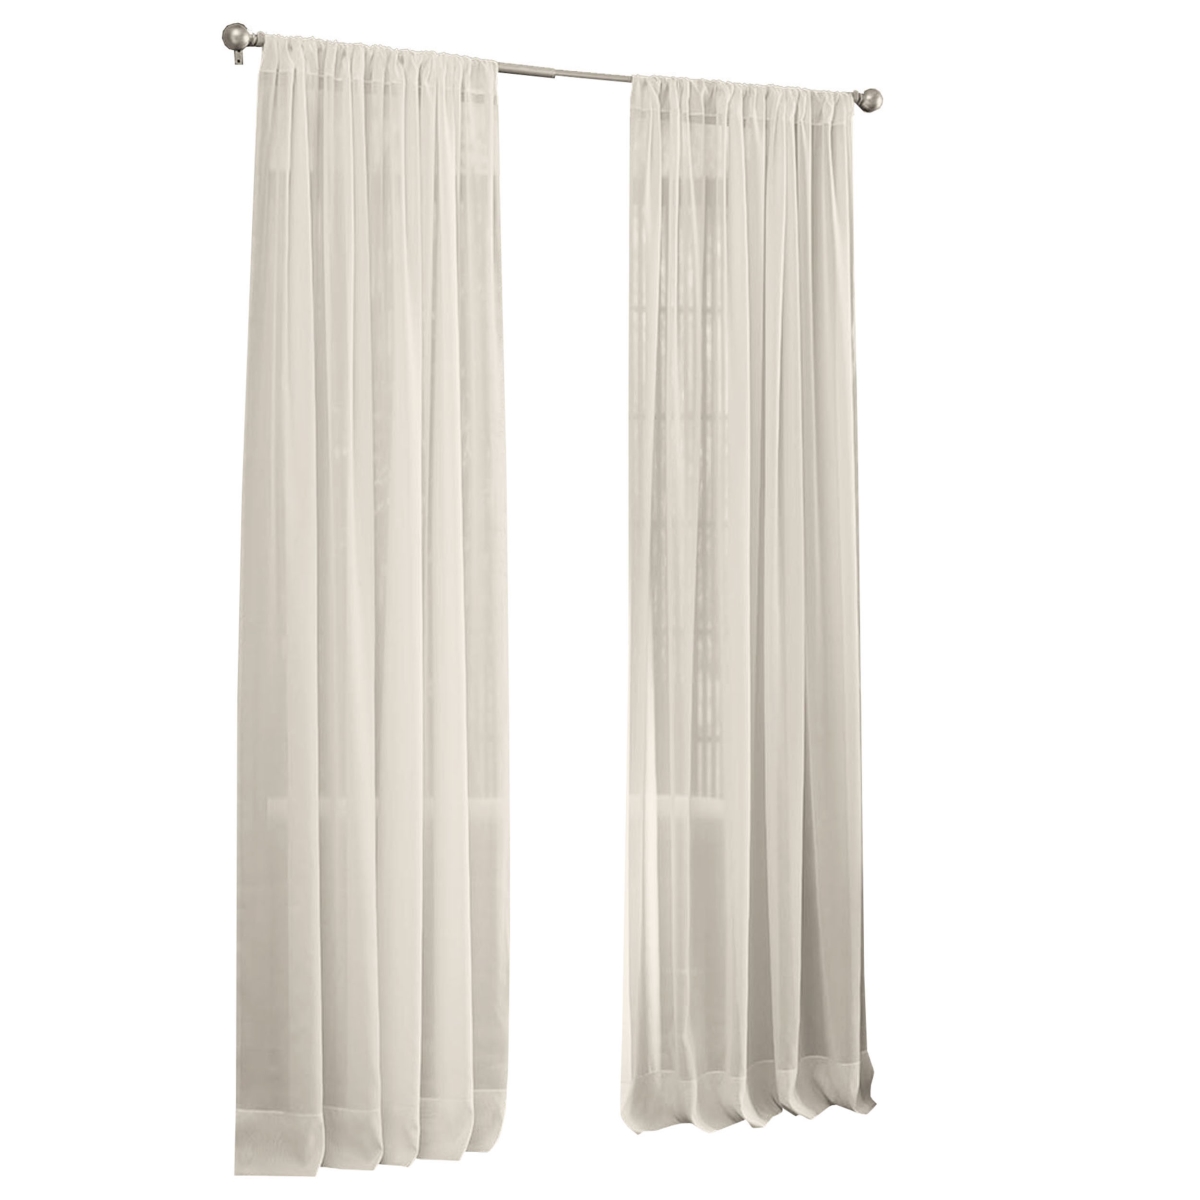 Voiledrap-118x108-ivory Sheer Voile Drape Panel, Ivory - 118 X 108 In.